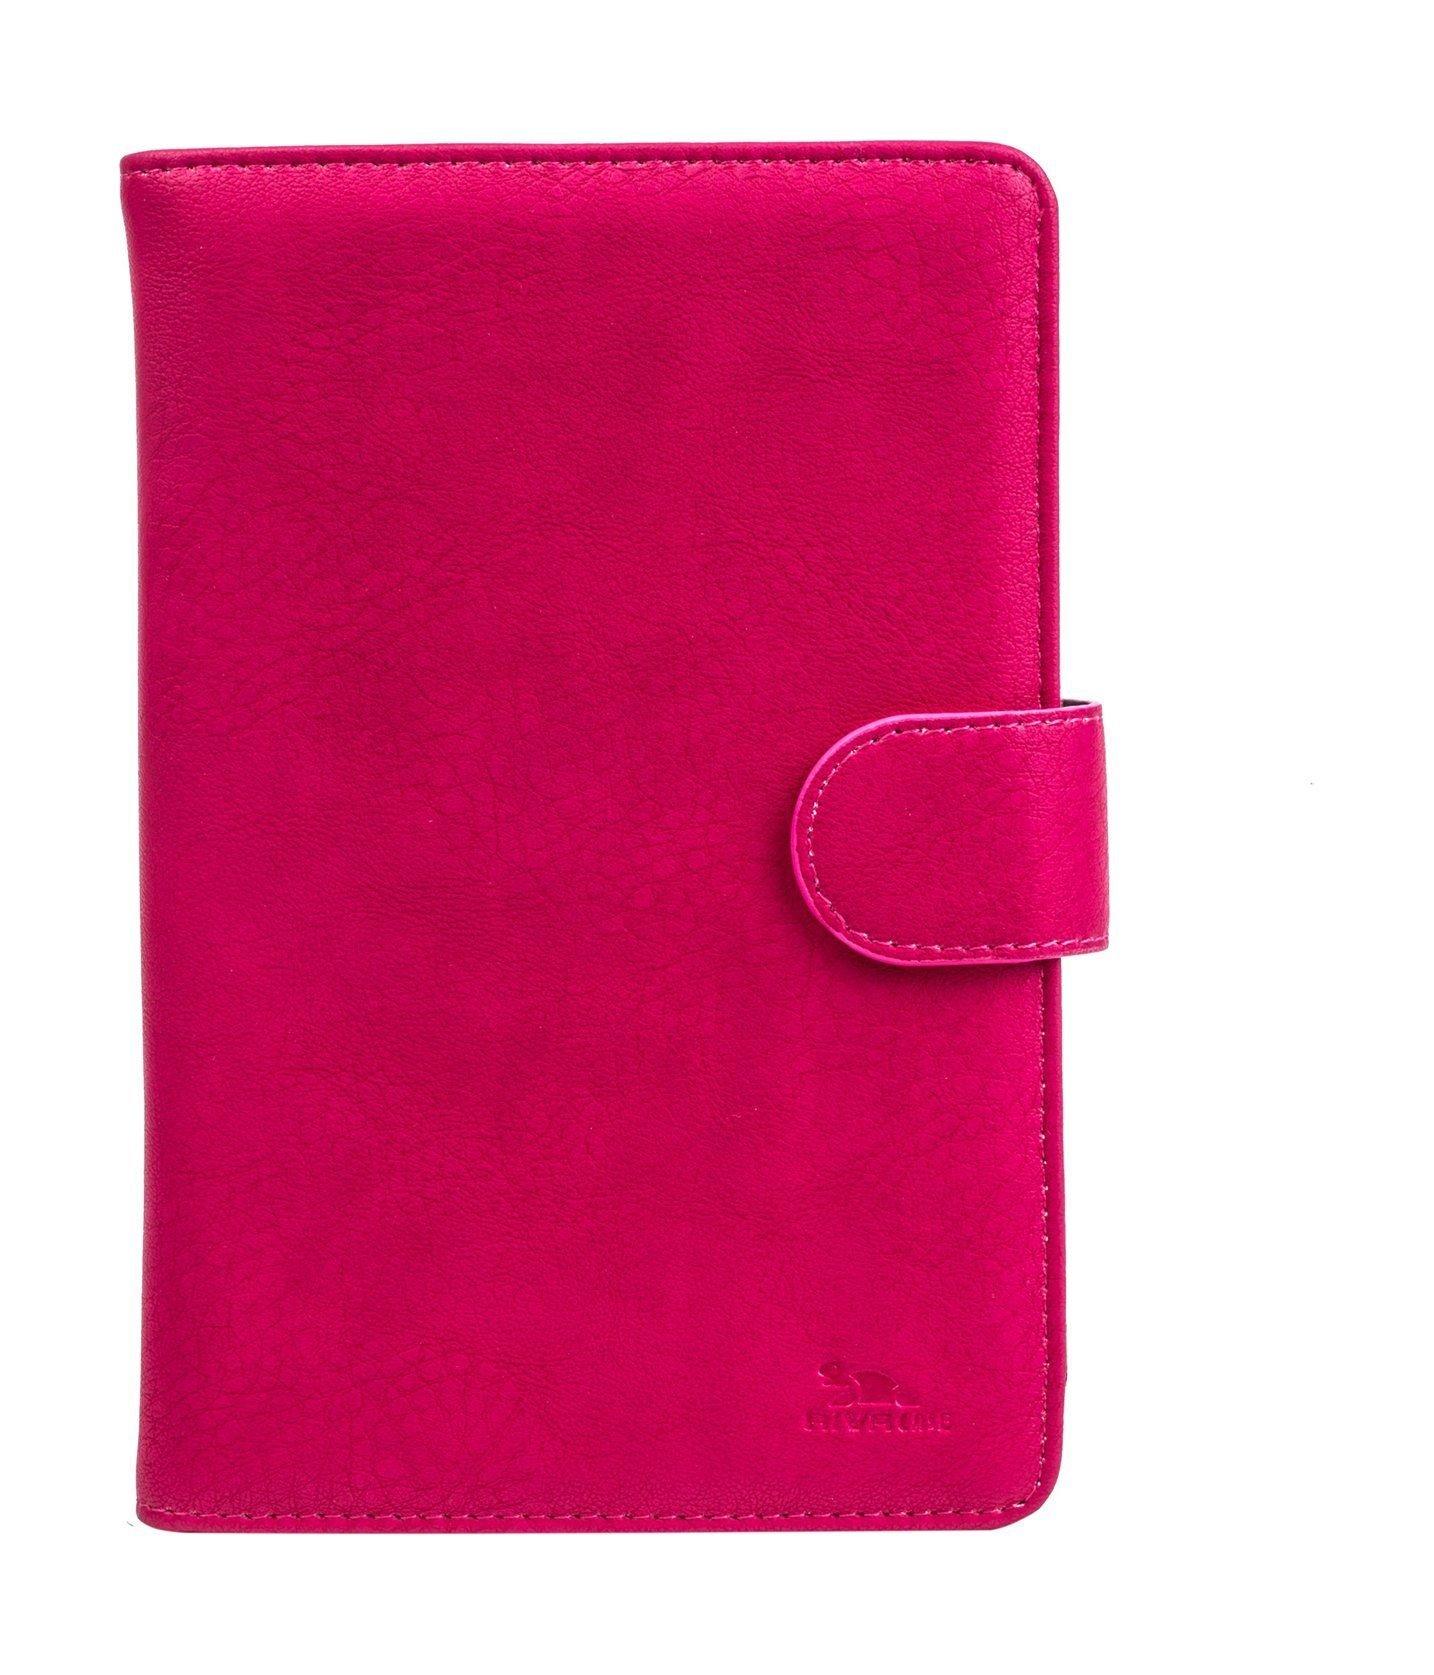 Buy Rivacase protective case for 10 inch tablet, 3017 - pink in Kuwait